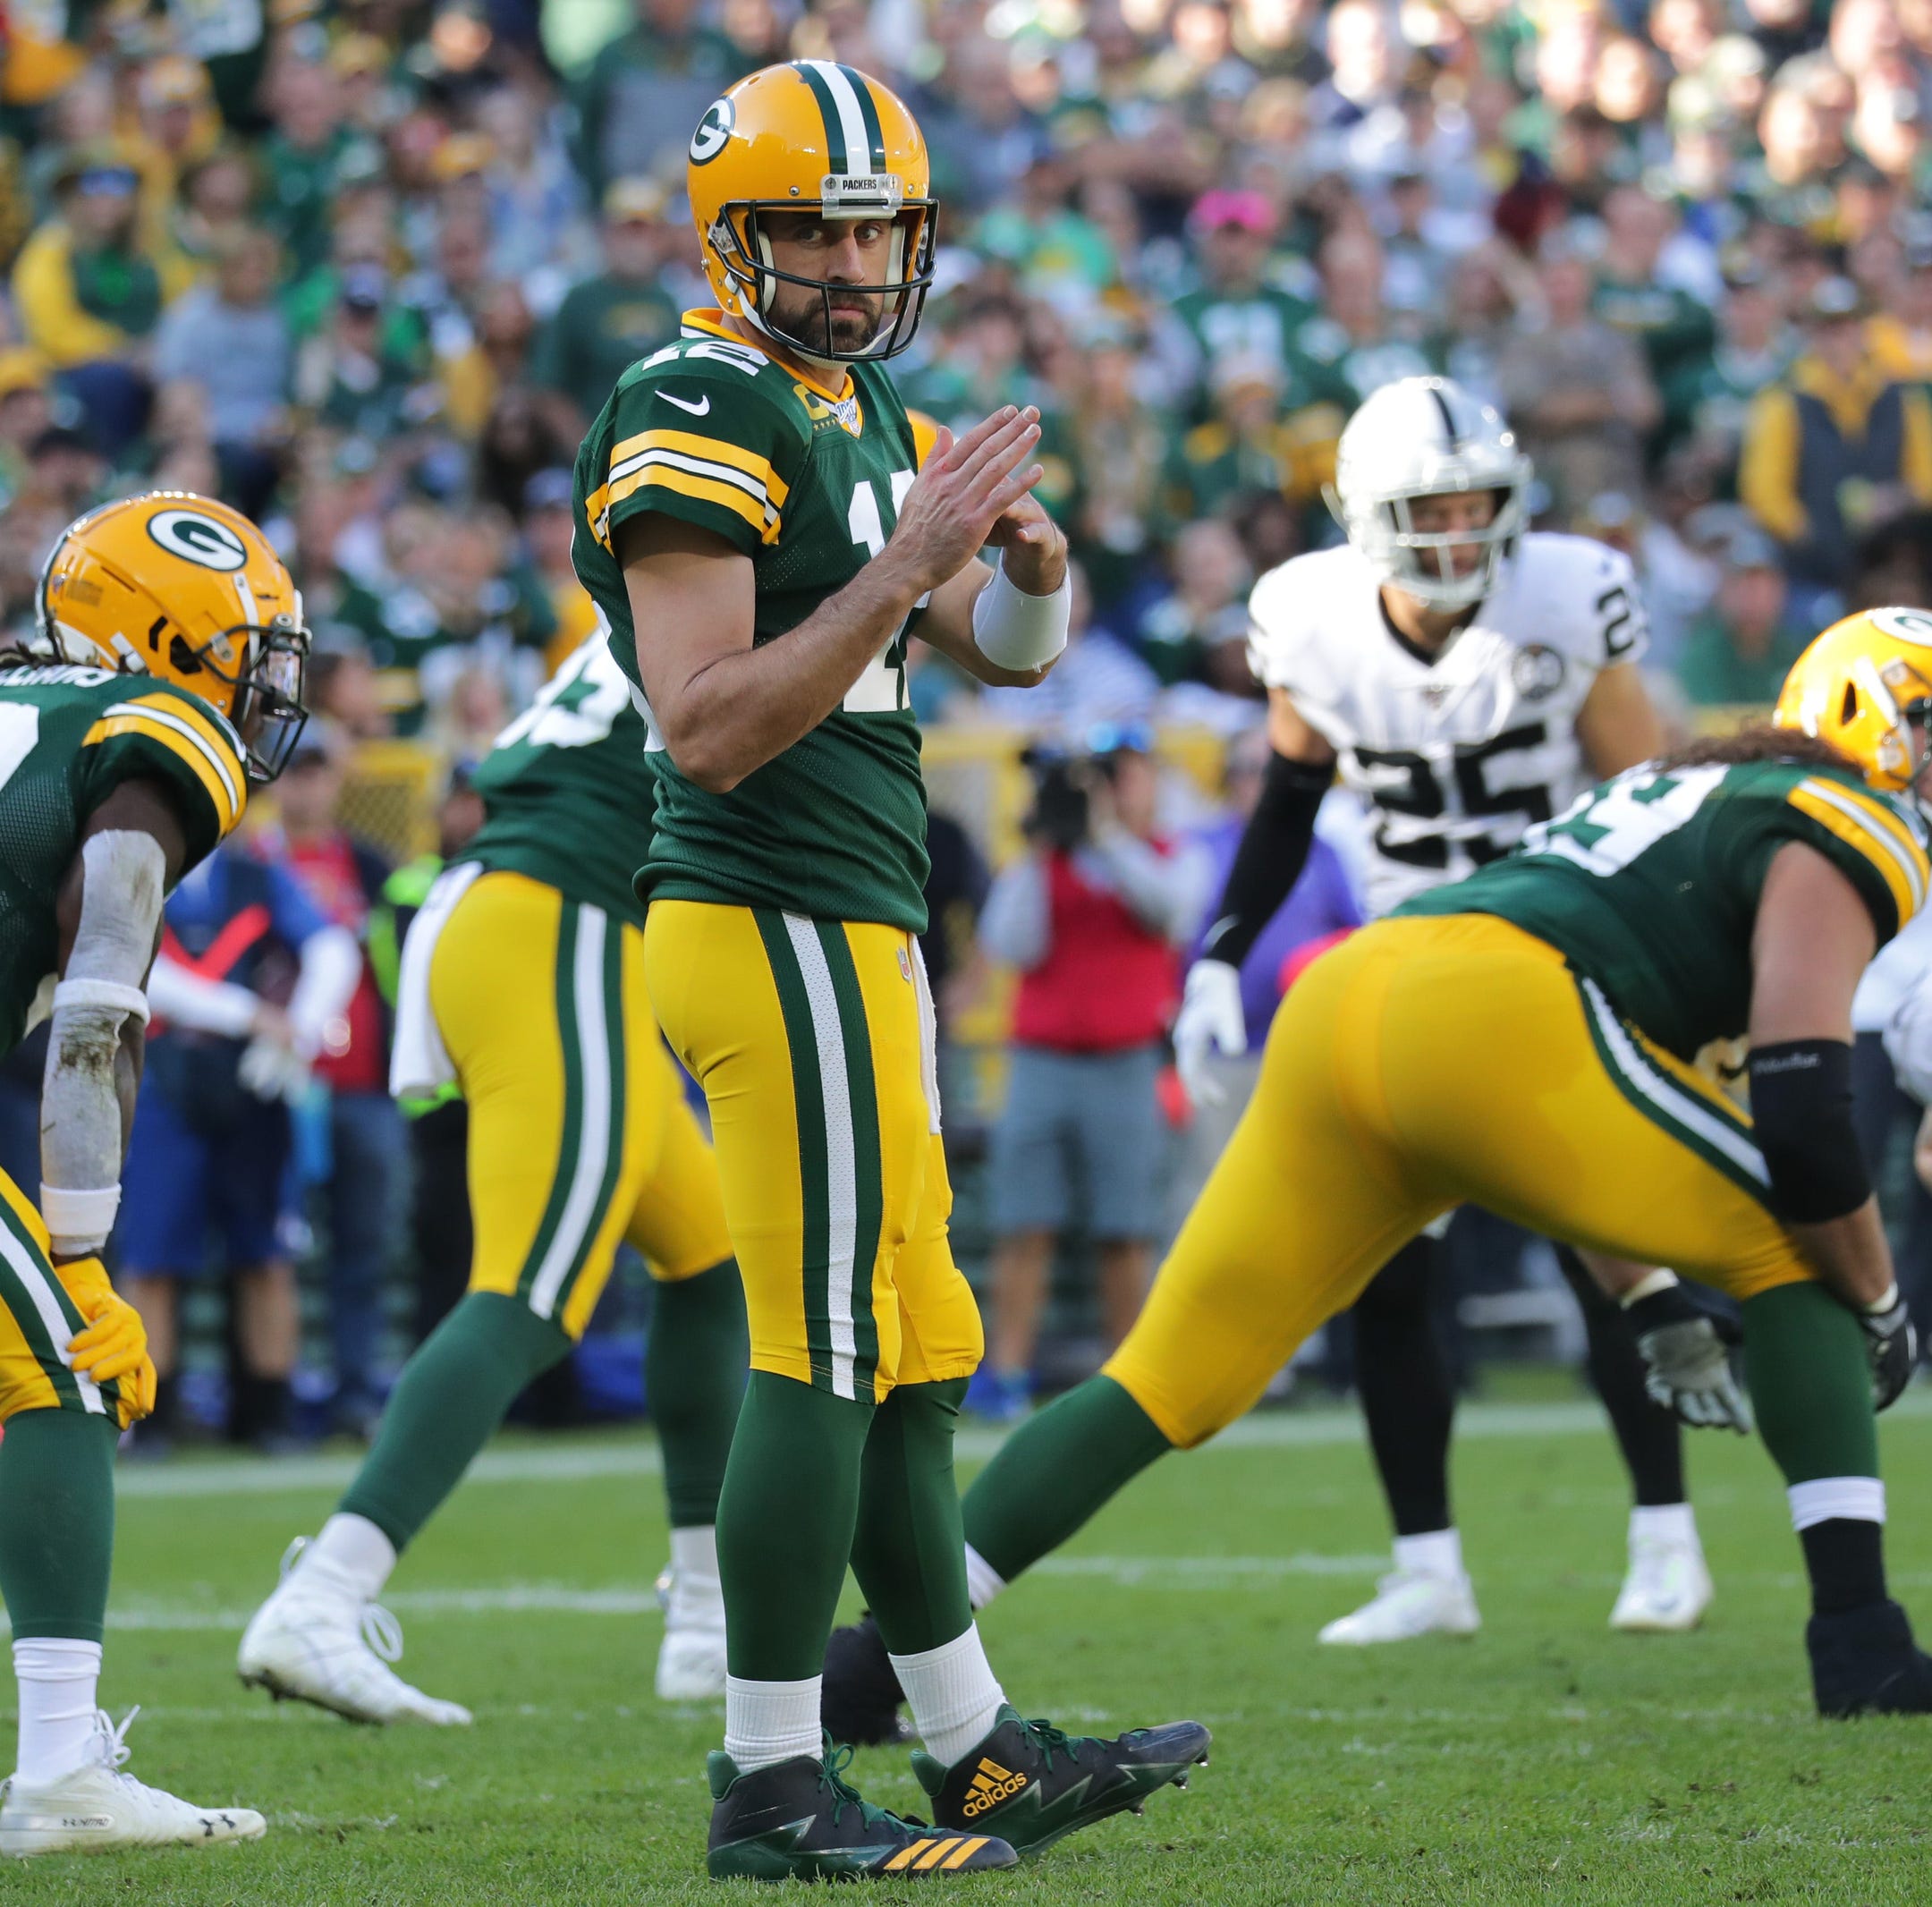 Packers GM: Rodgers can still play 'at a very high level